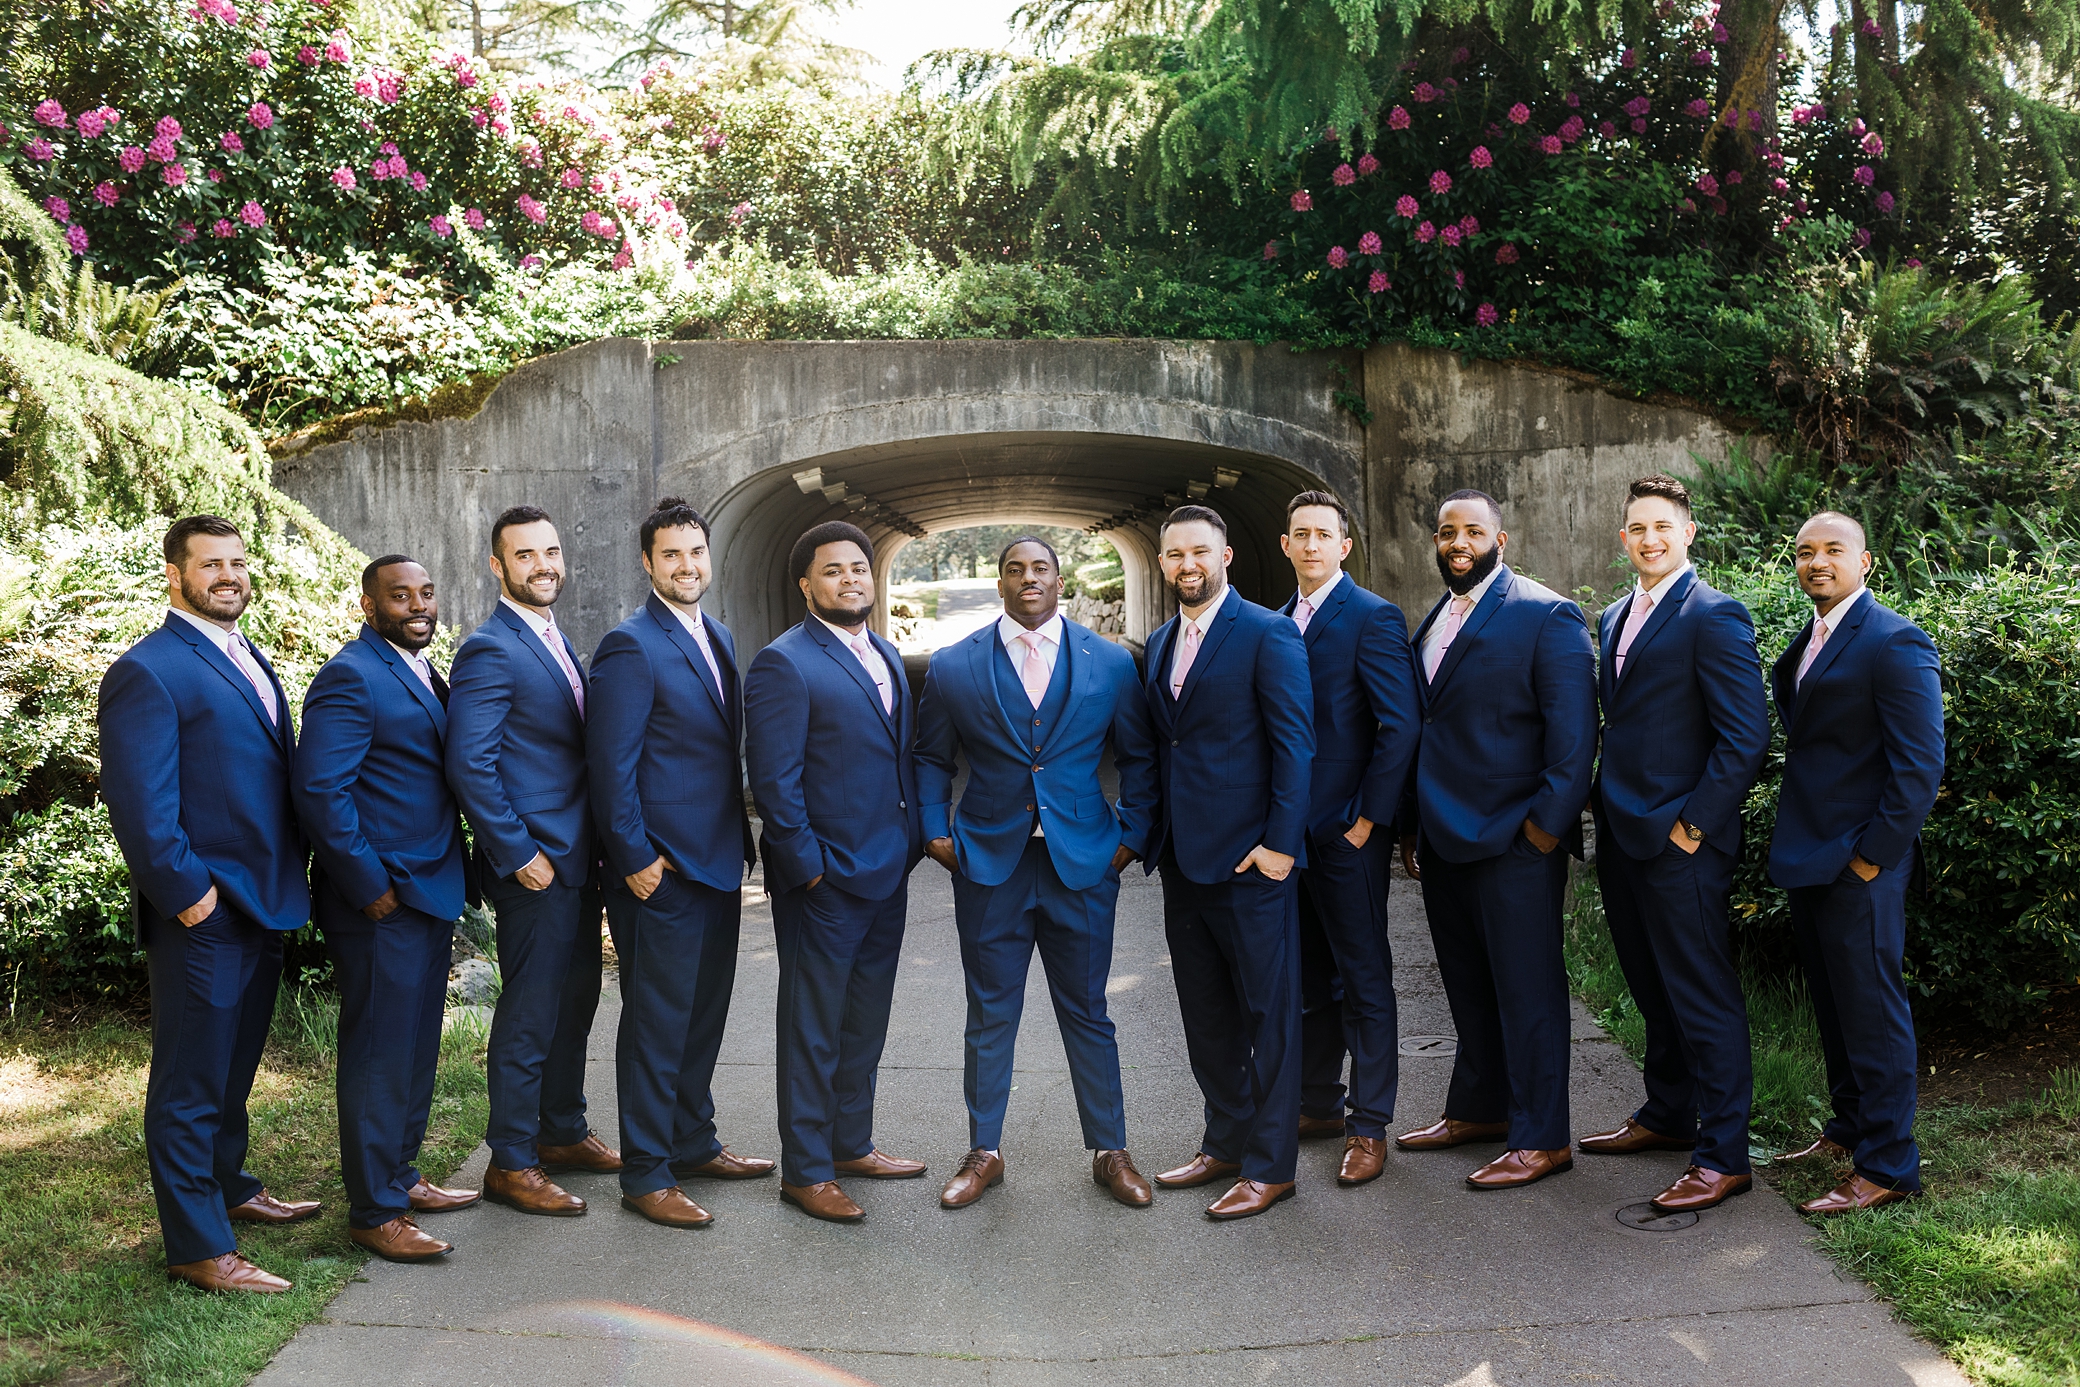 Groom and his groomsman at Olympia Wedding Venue, Indian Summer Golf & Country Club | Megan Montalvo Photography